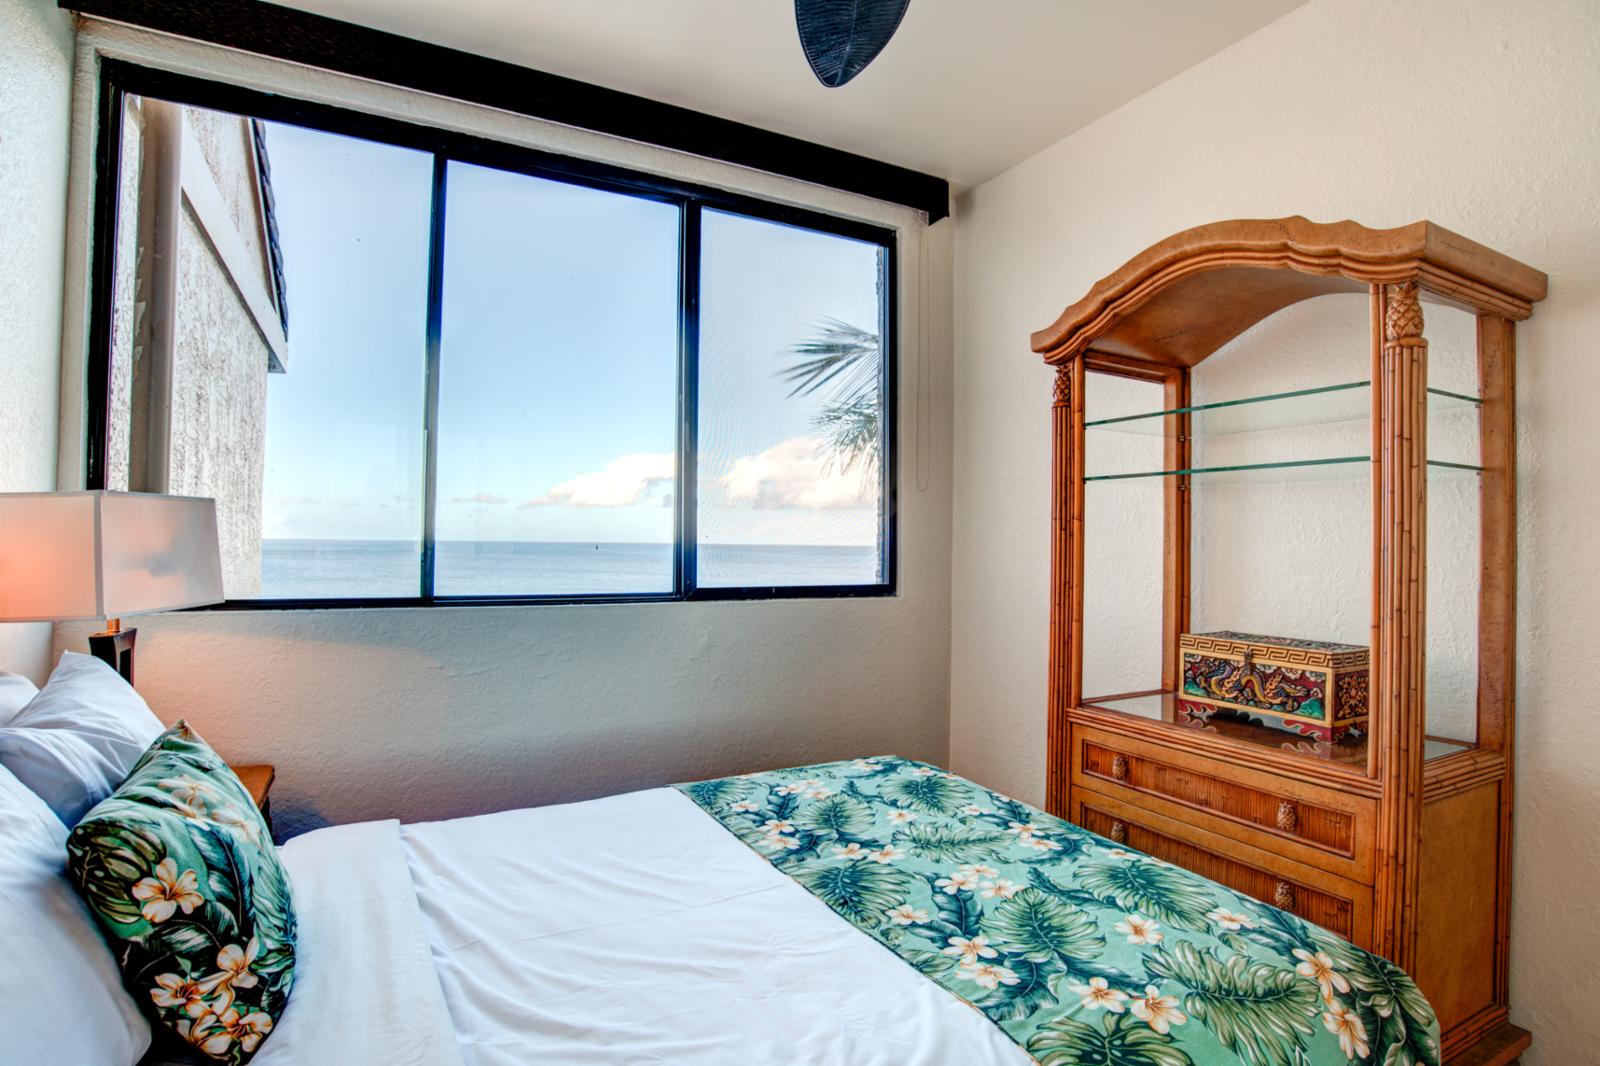 Relax and enjoy your oceanfront bliss!